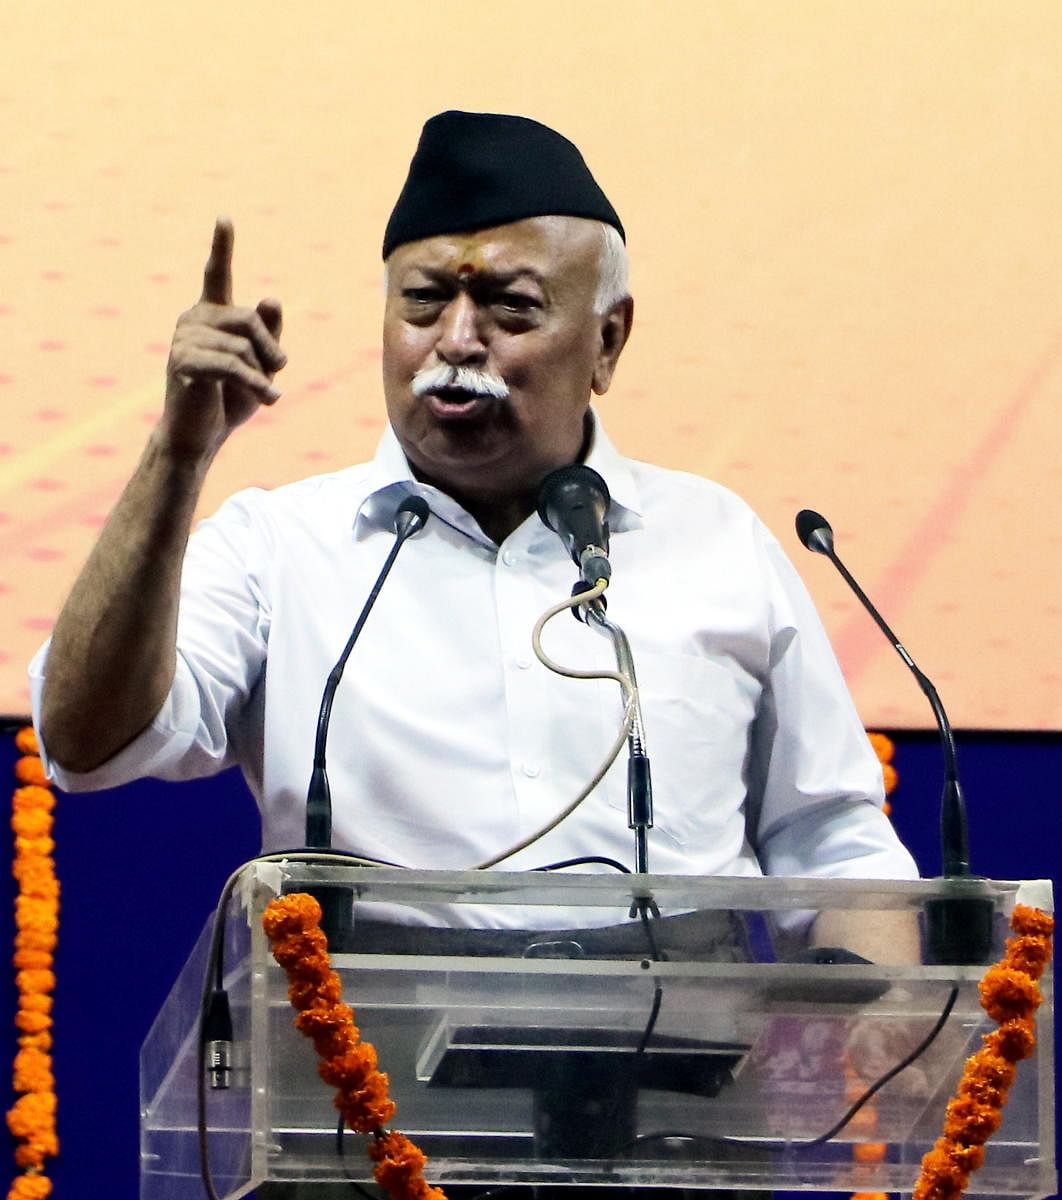 RSS chief Mohan Bhagwat speaks during the closing ceremony of ‘Tritiya Varsha Sangh Shiksha Varg’, an (RSS) event to mark the conclusion of a three-year training camp for Swayamsevaks, in Nagpur, Sunday, June 16, 2019. (PTI Photo)